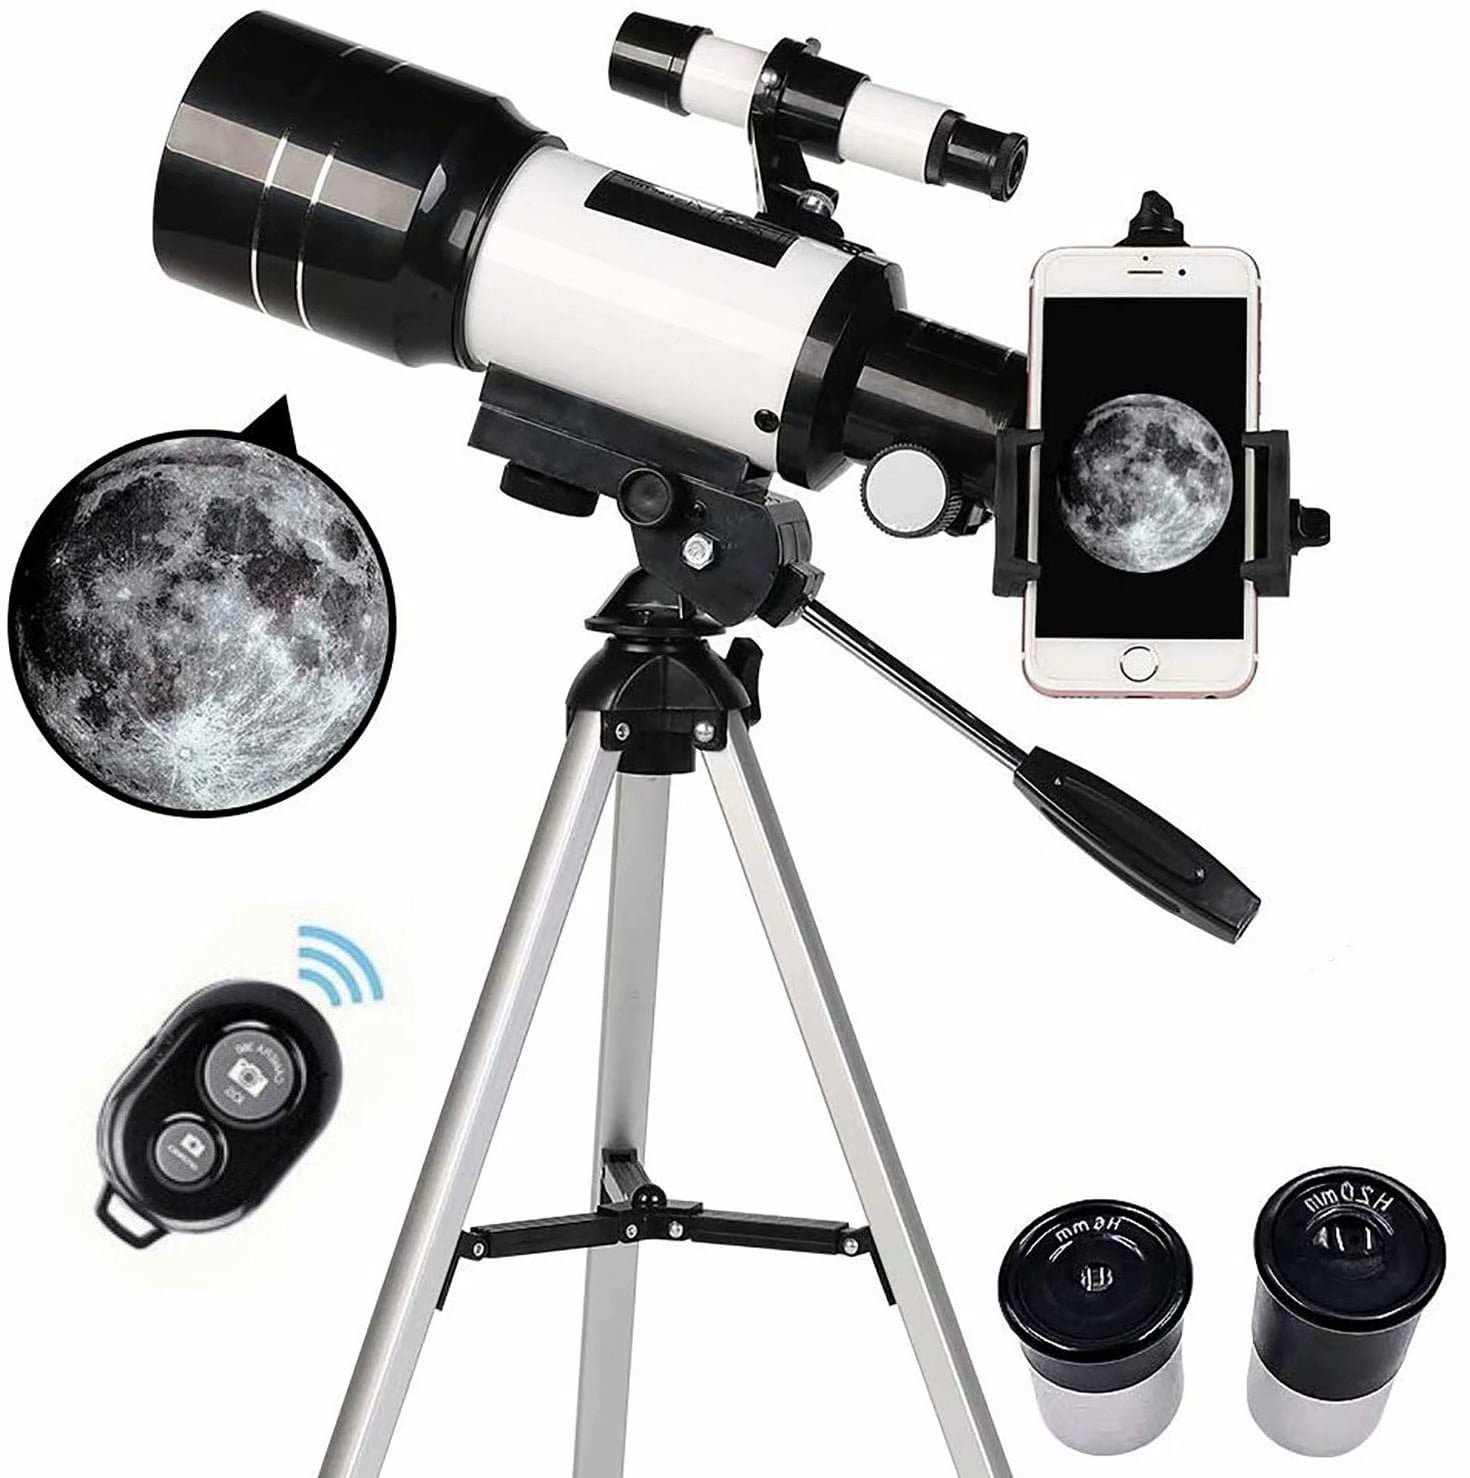 USCAMEL Telescope for Kids and Beginners,70mm Aperture 400mm Astronomy Telescopes with Cellphone Adapter,Backpack and Adjustable Tripod Portable Astronomical Refractor Telescope for Moon Viewing 